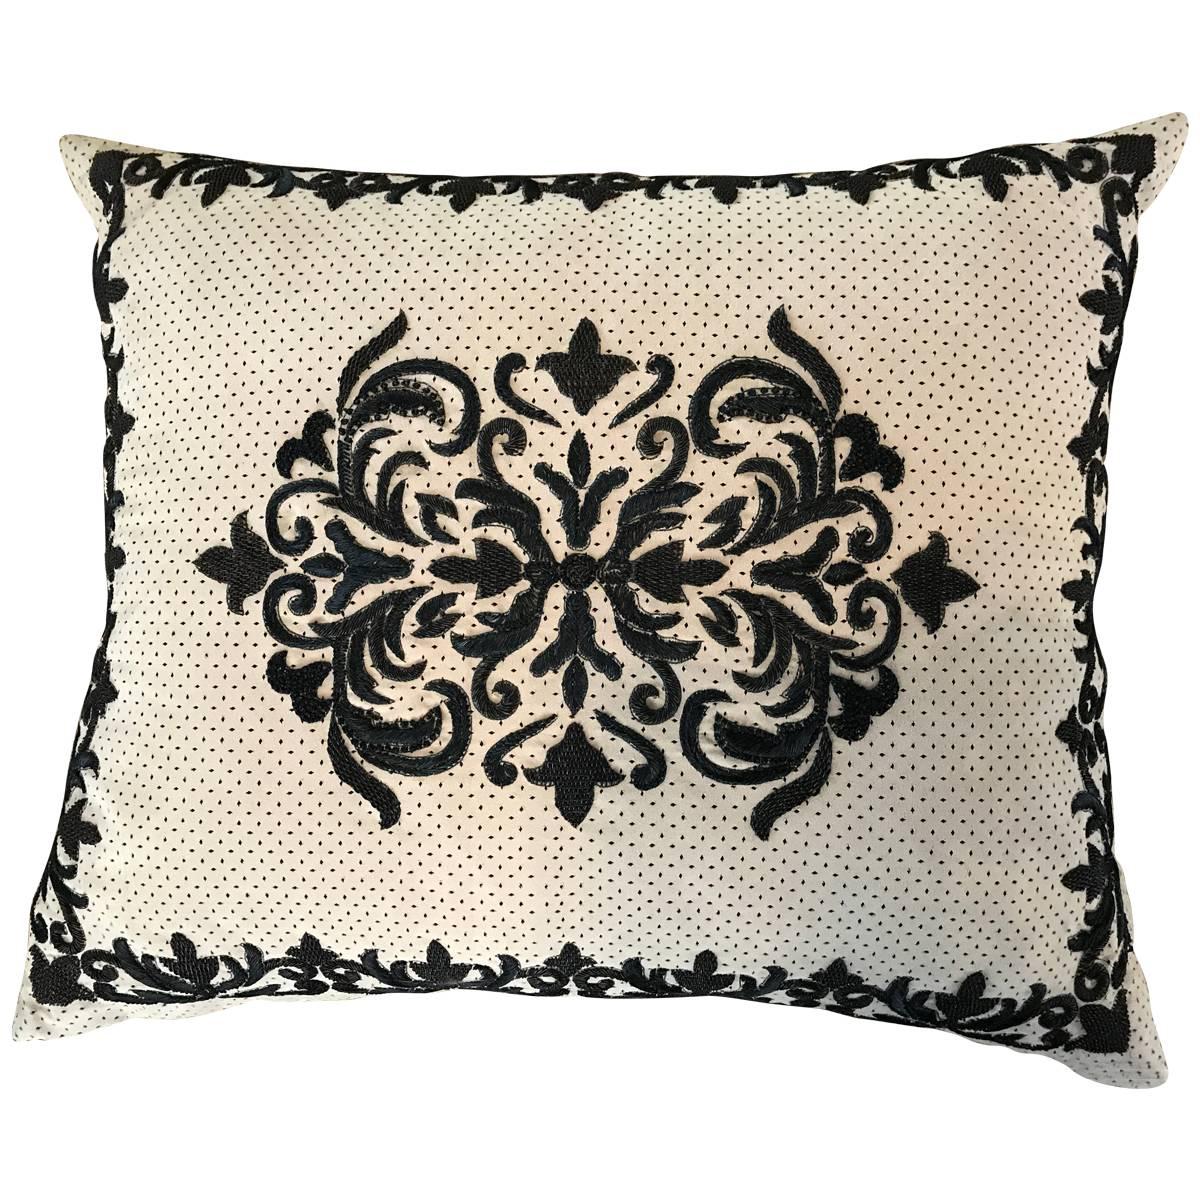 Chic Sand and Black Ultra Suede Heavily Embroidered Decorative Pillow